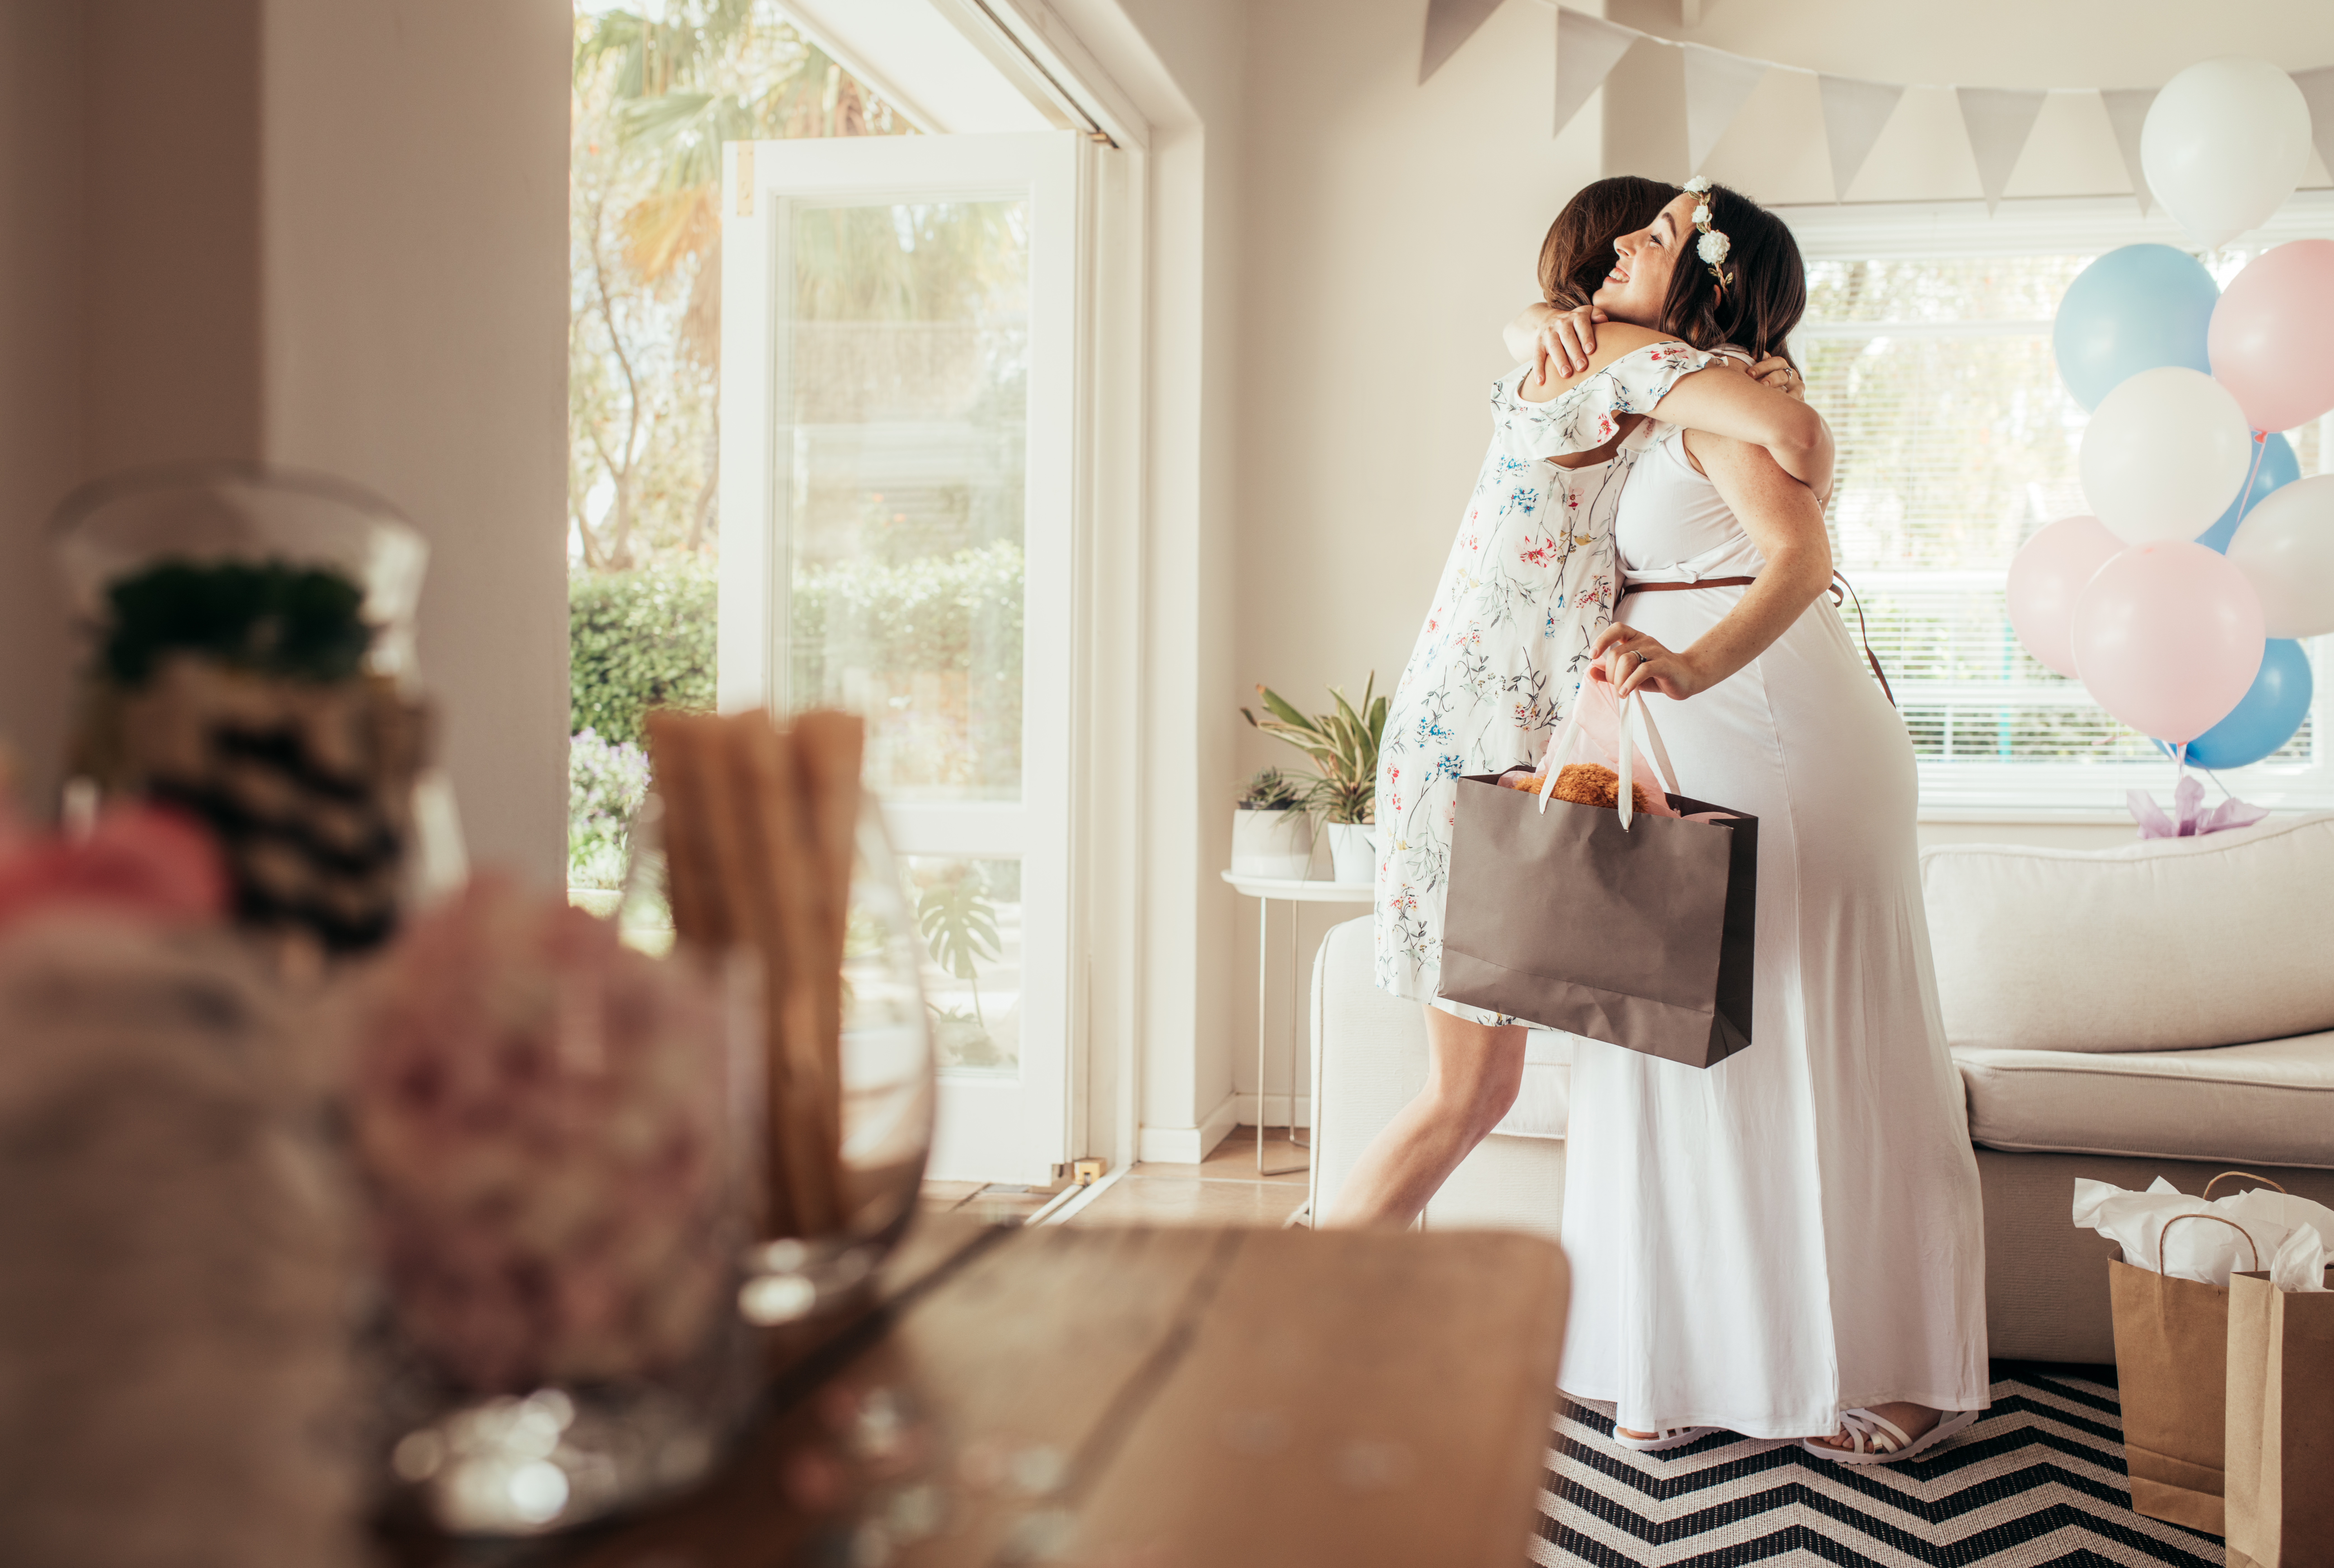 A woman hugging a pregnant mother at baby shower | Source: Shutterstock